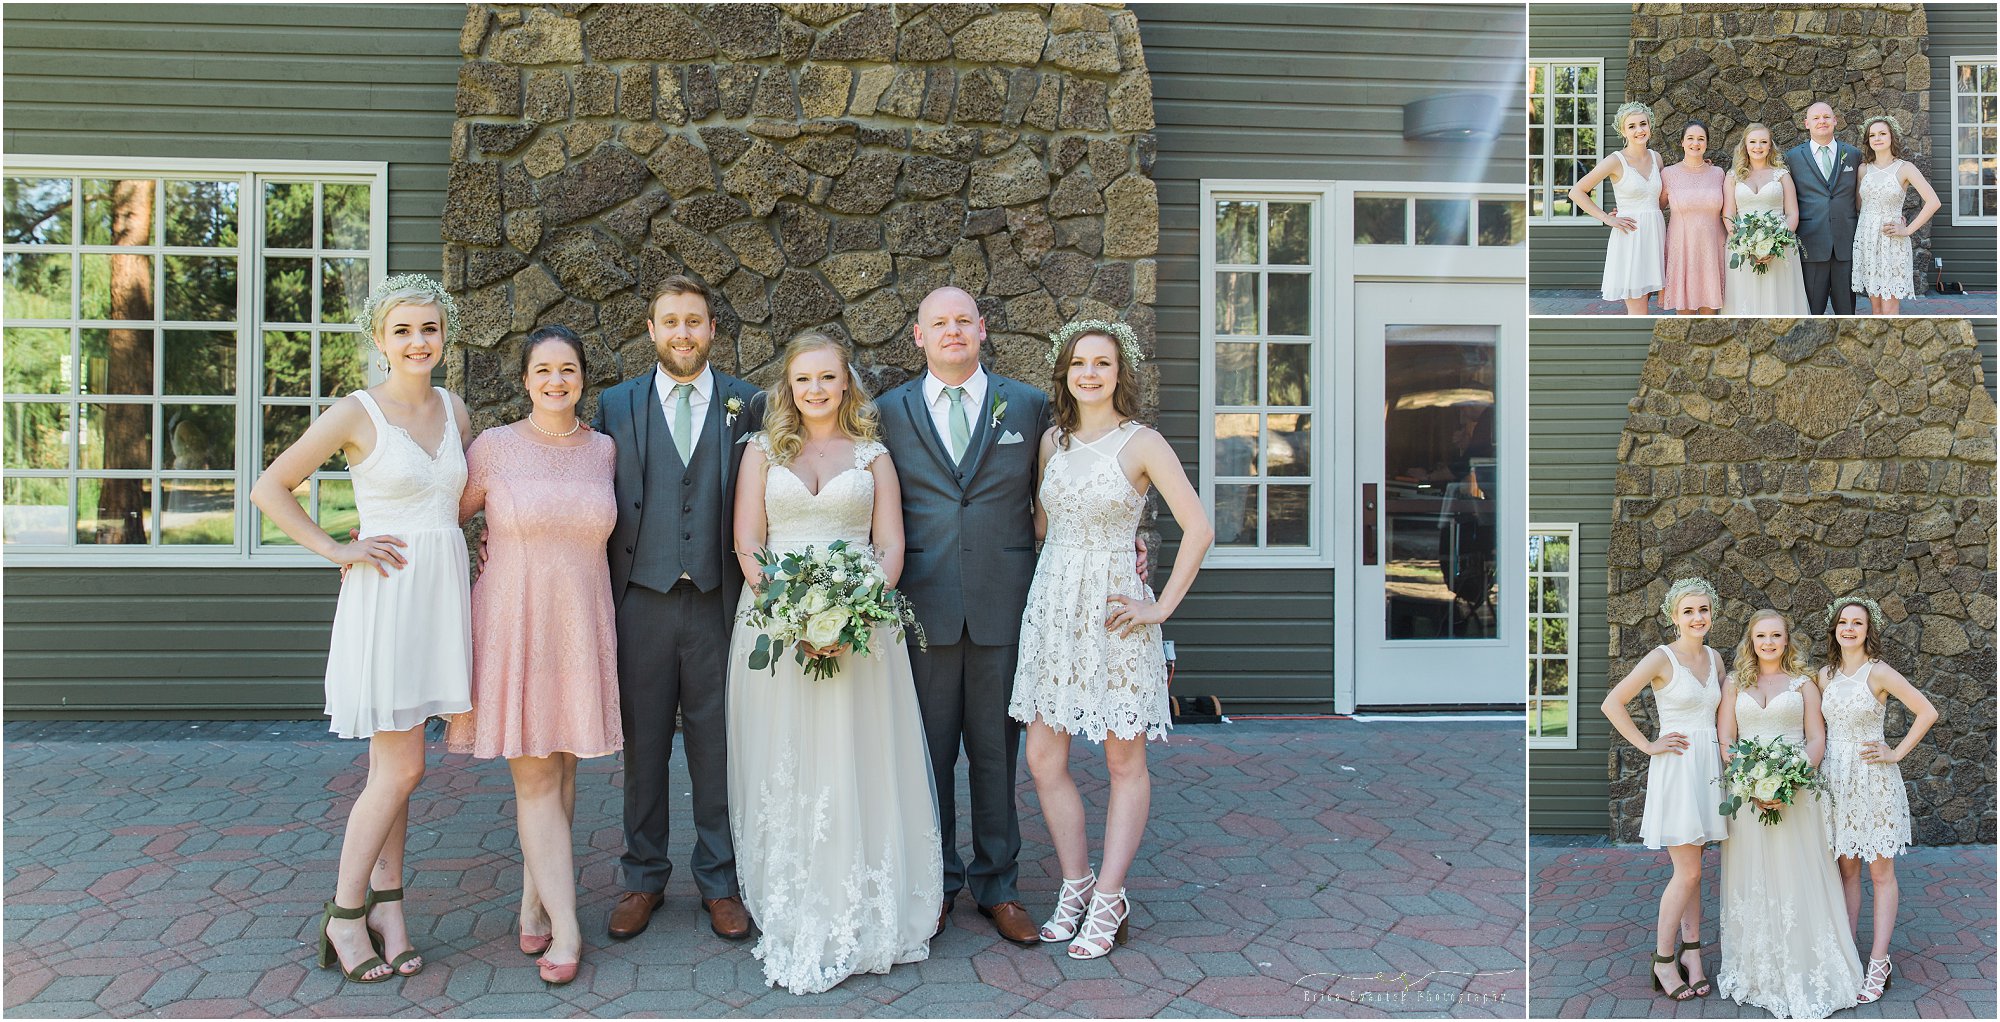 Family portraits at this Aspen Hall wedding in Bend, OR. | Erica Swantek Photography